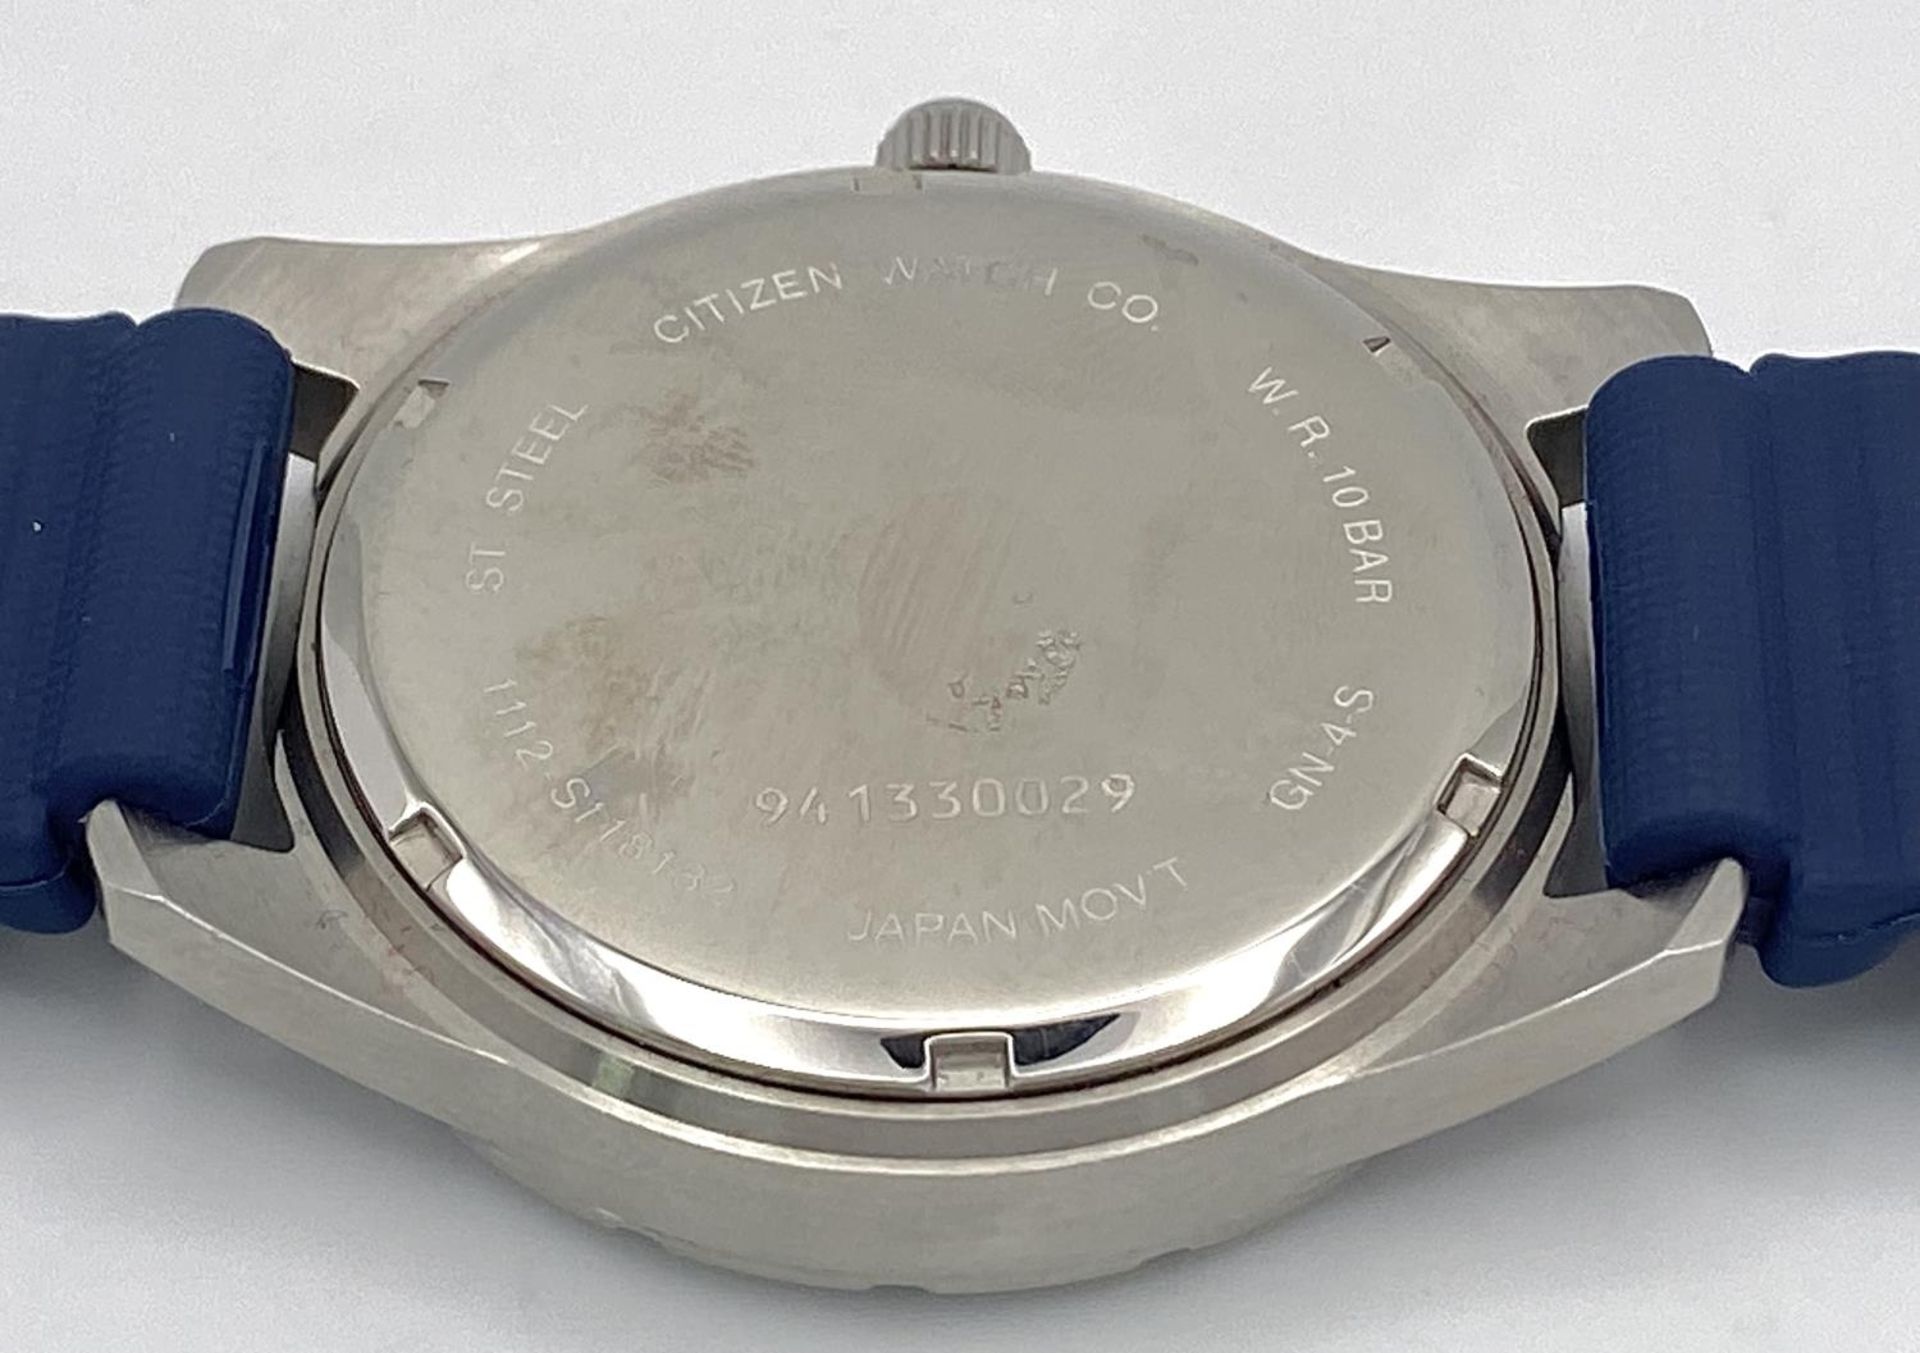 A Citizen Quartz Gents Watch. Blue rubber strap. Stainless steel case - 42mm. Blue dial with date - Image 6 of 6